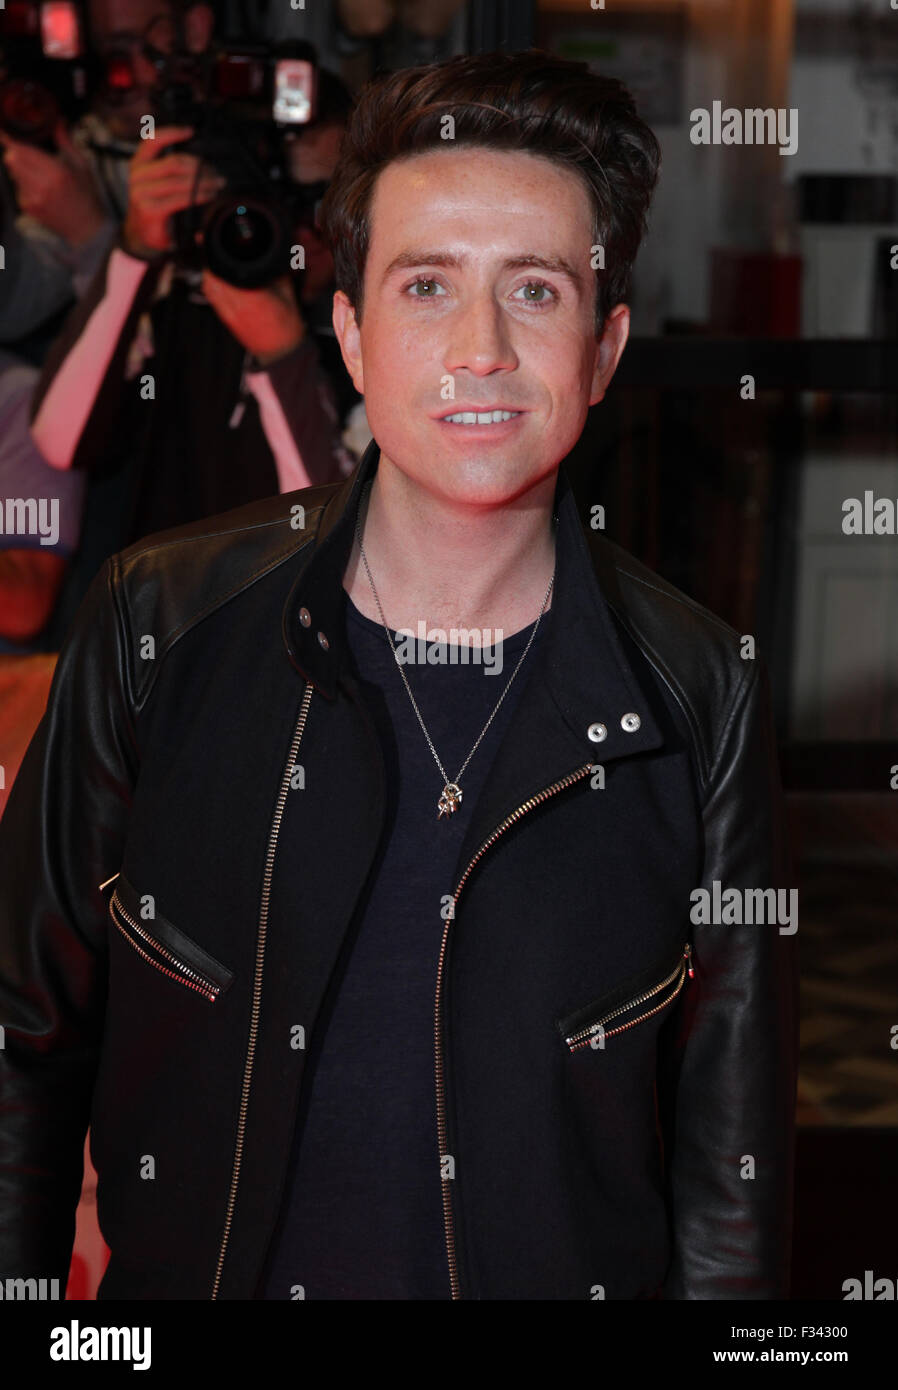 LONDON - AUG  26, 2015: Nick Grimshaw attends The X Factor TV series launch in London. Stock Photo